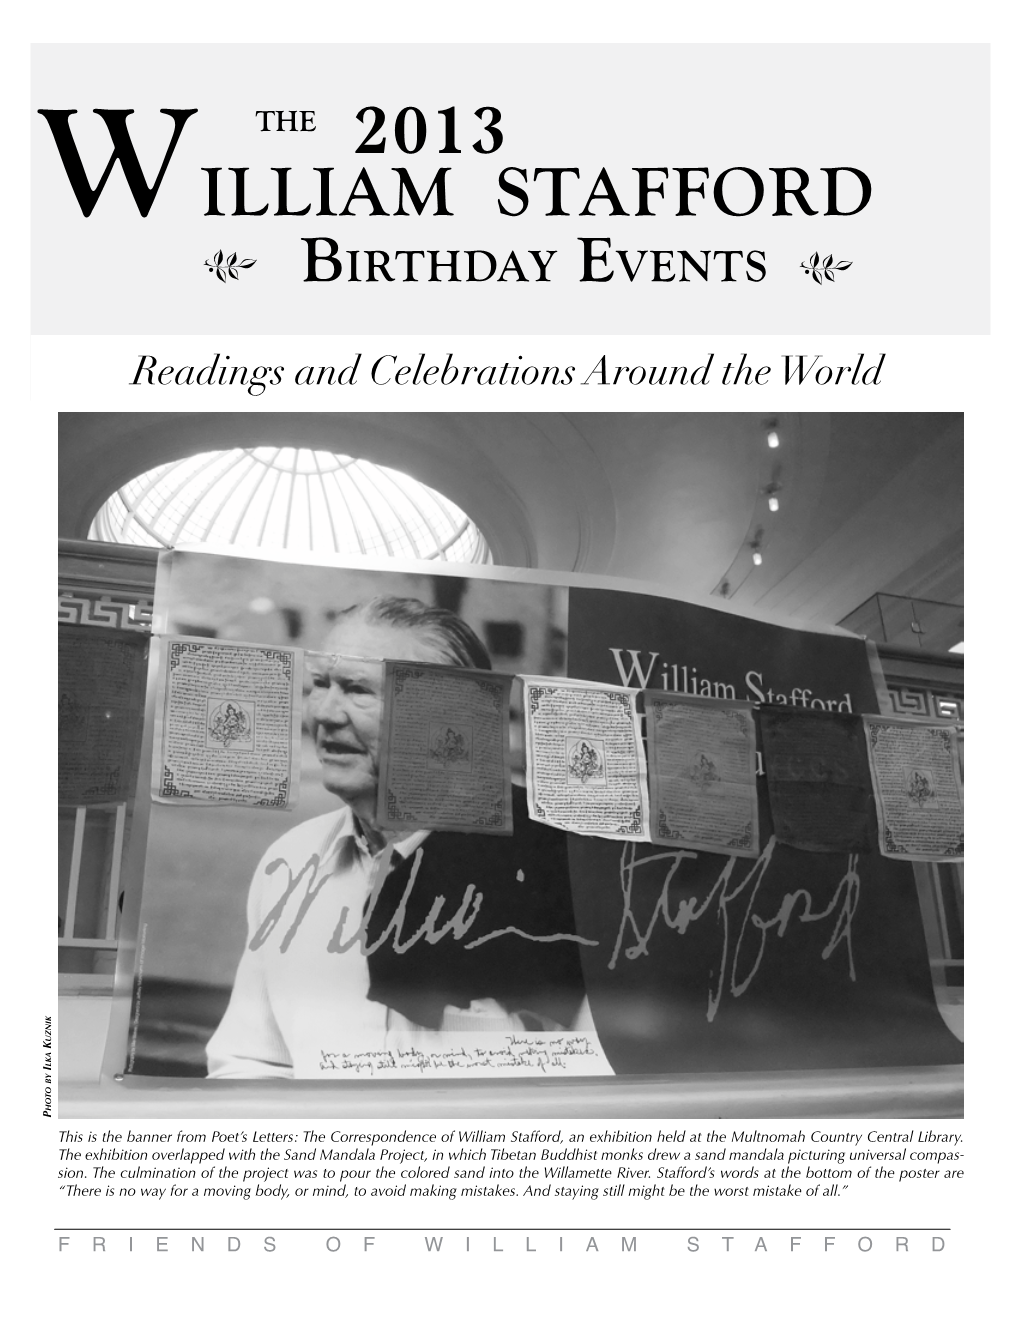 William Stafford, an Exhibition Held at the Multnomah Country Central Library